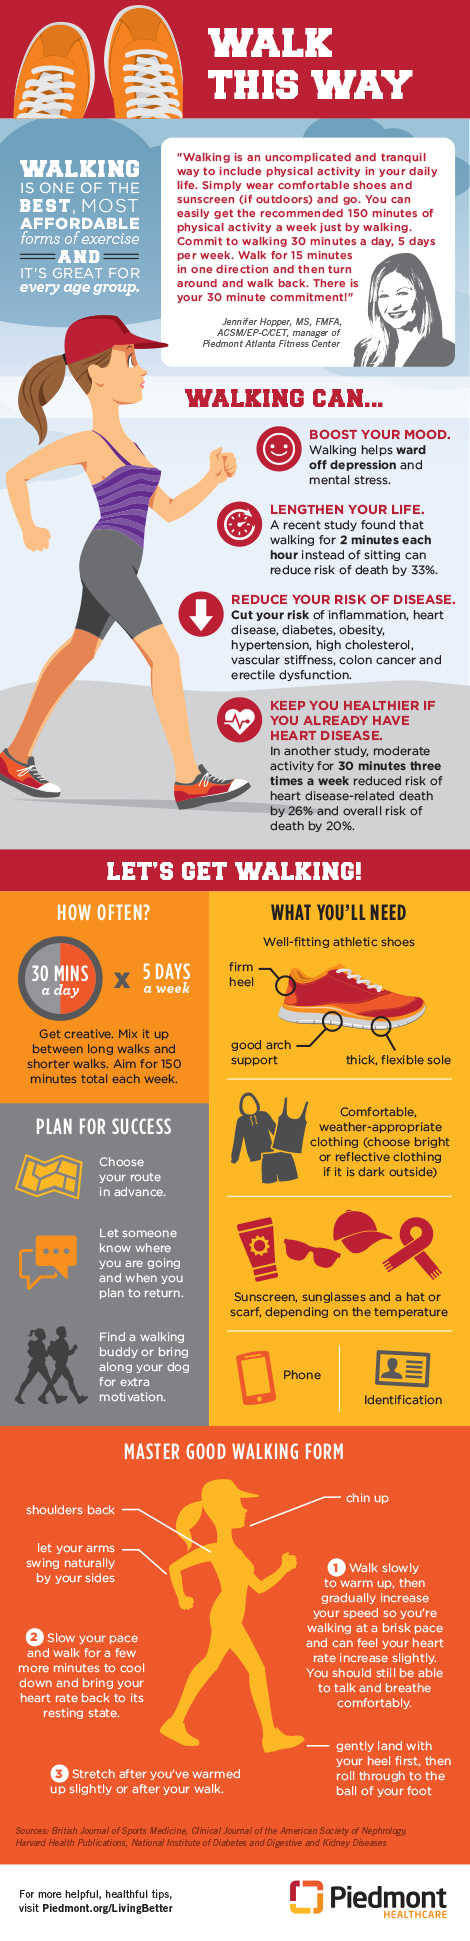 Learn About The Health Benefits Of Walking